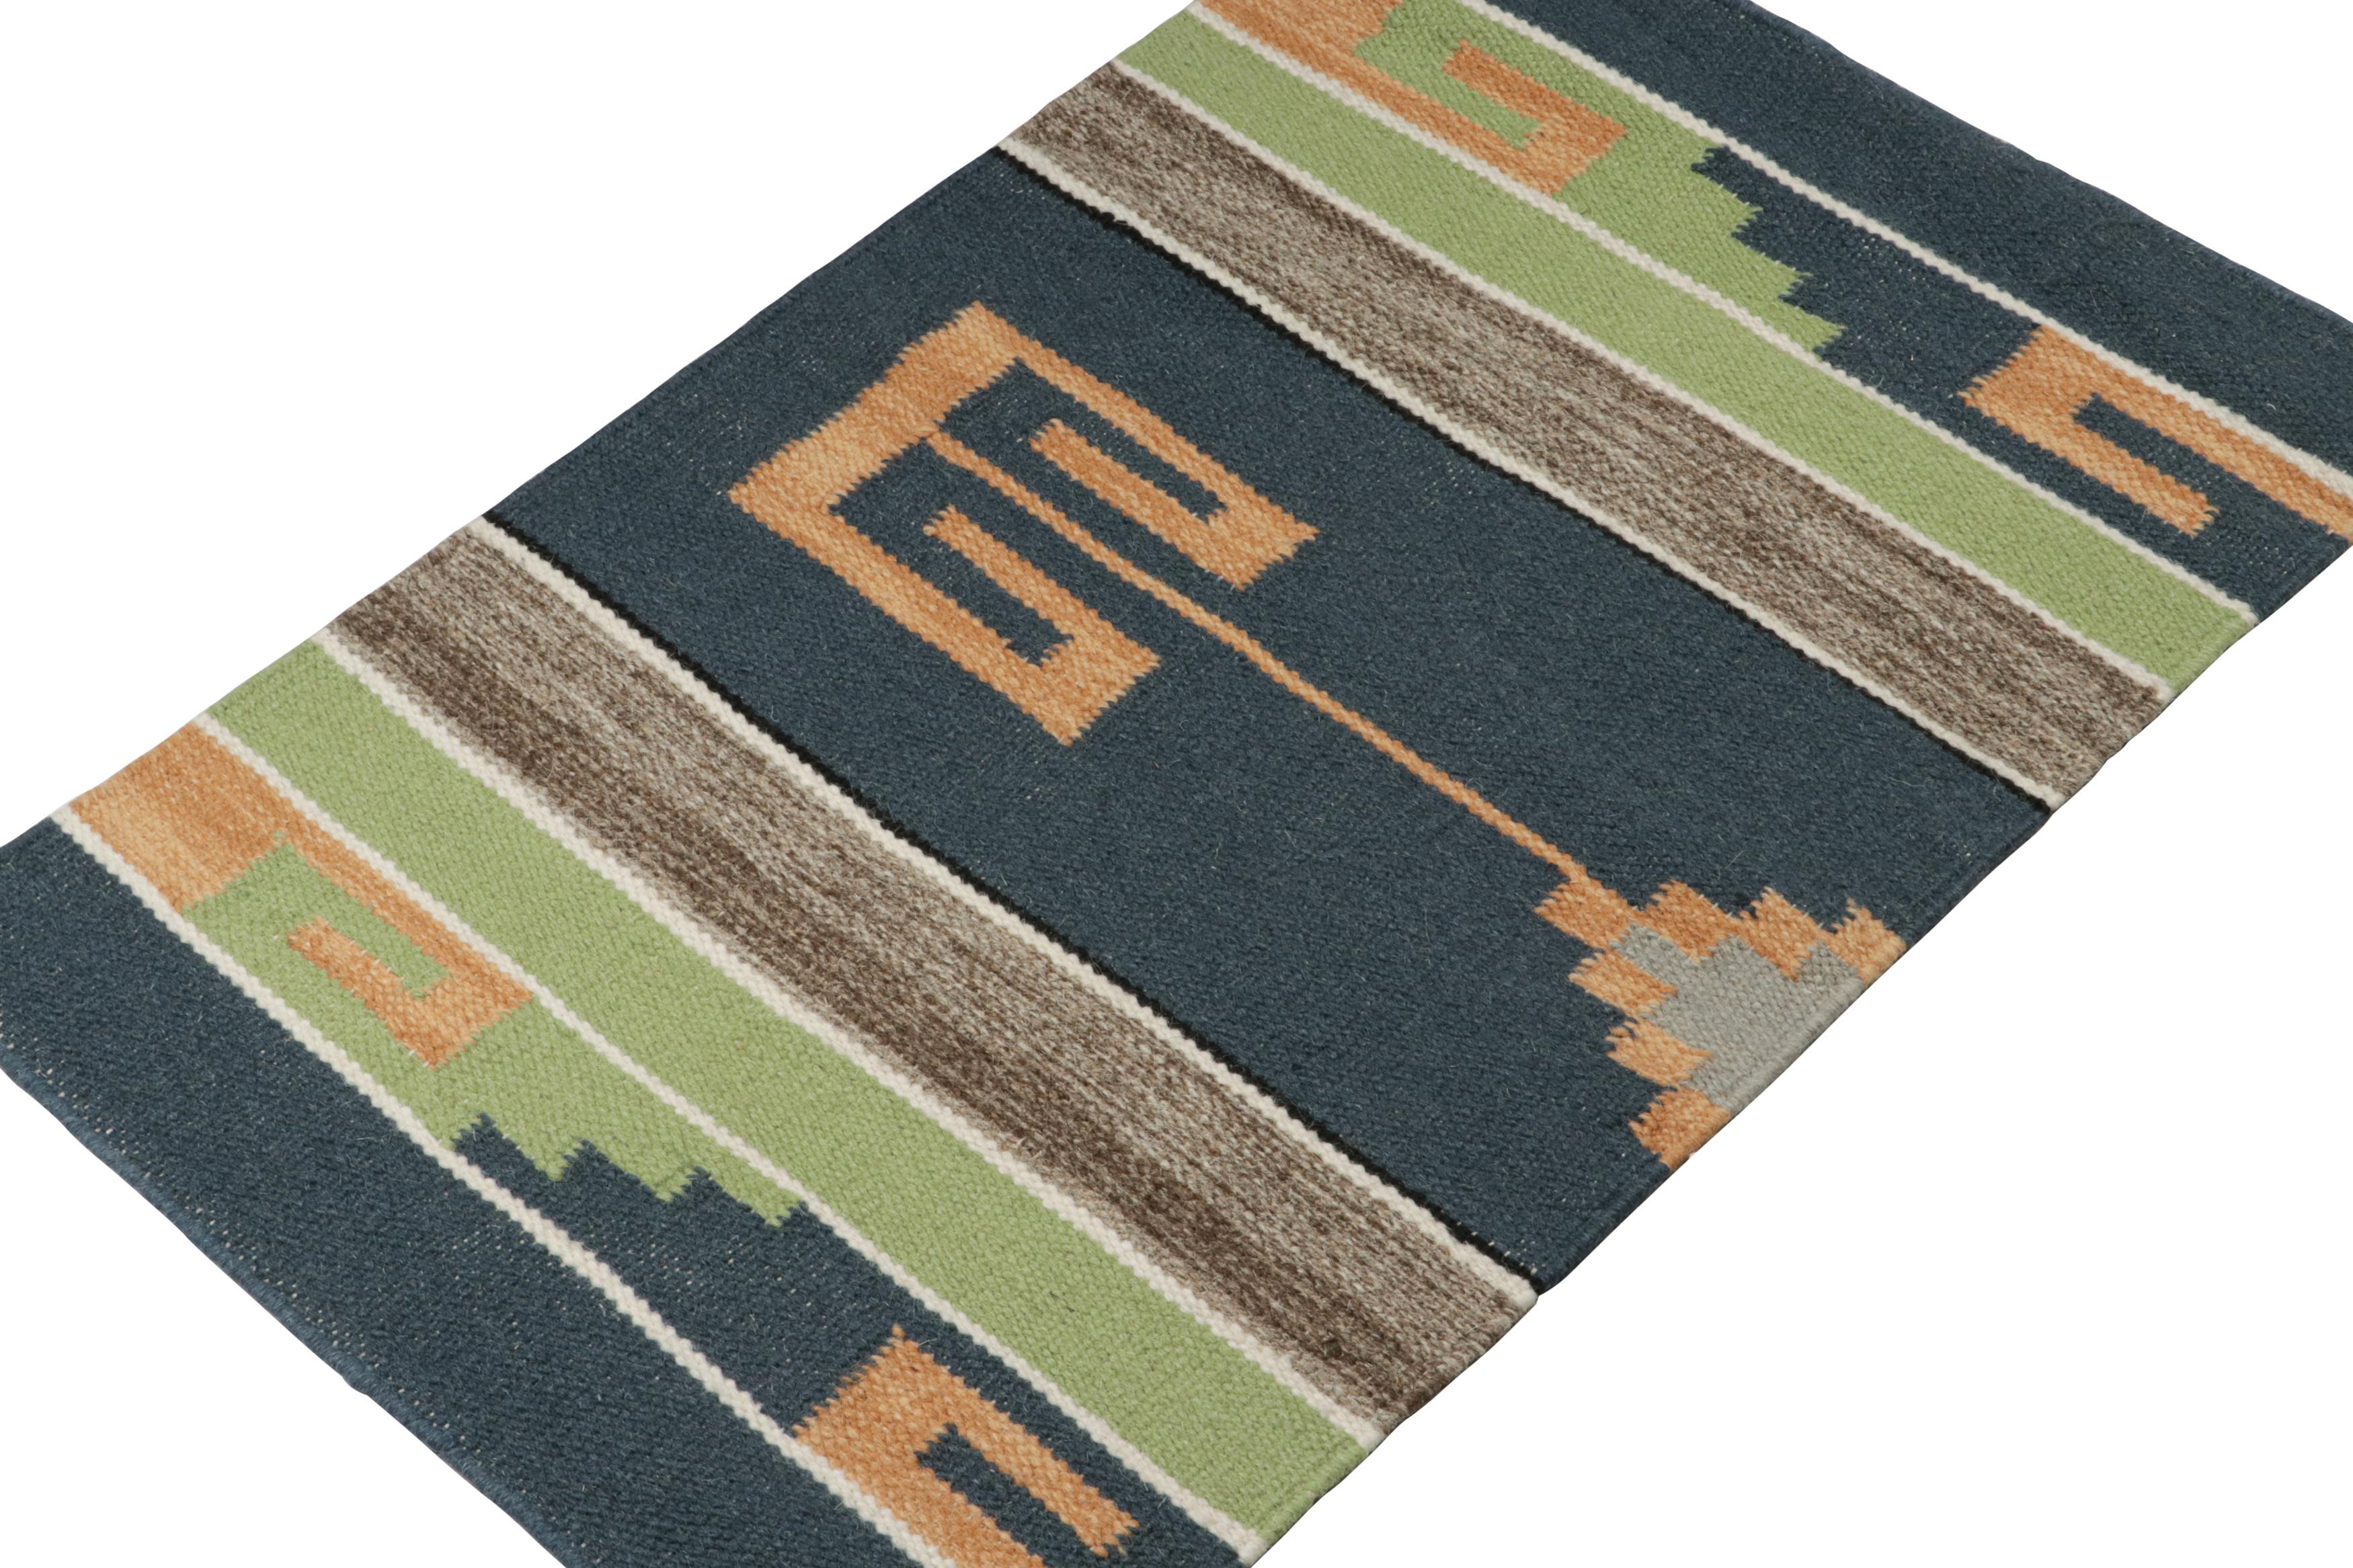 Inspired by tribal kilims, this 2x3 piece is a refreshing new addition to the flatweave collection by Rug & Kilim.  

On the Design: 

Handwoven in wool, this contemporary kilim carries geometric patterns in more modern colors of blue, green, gold &